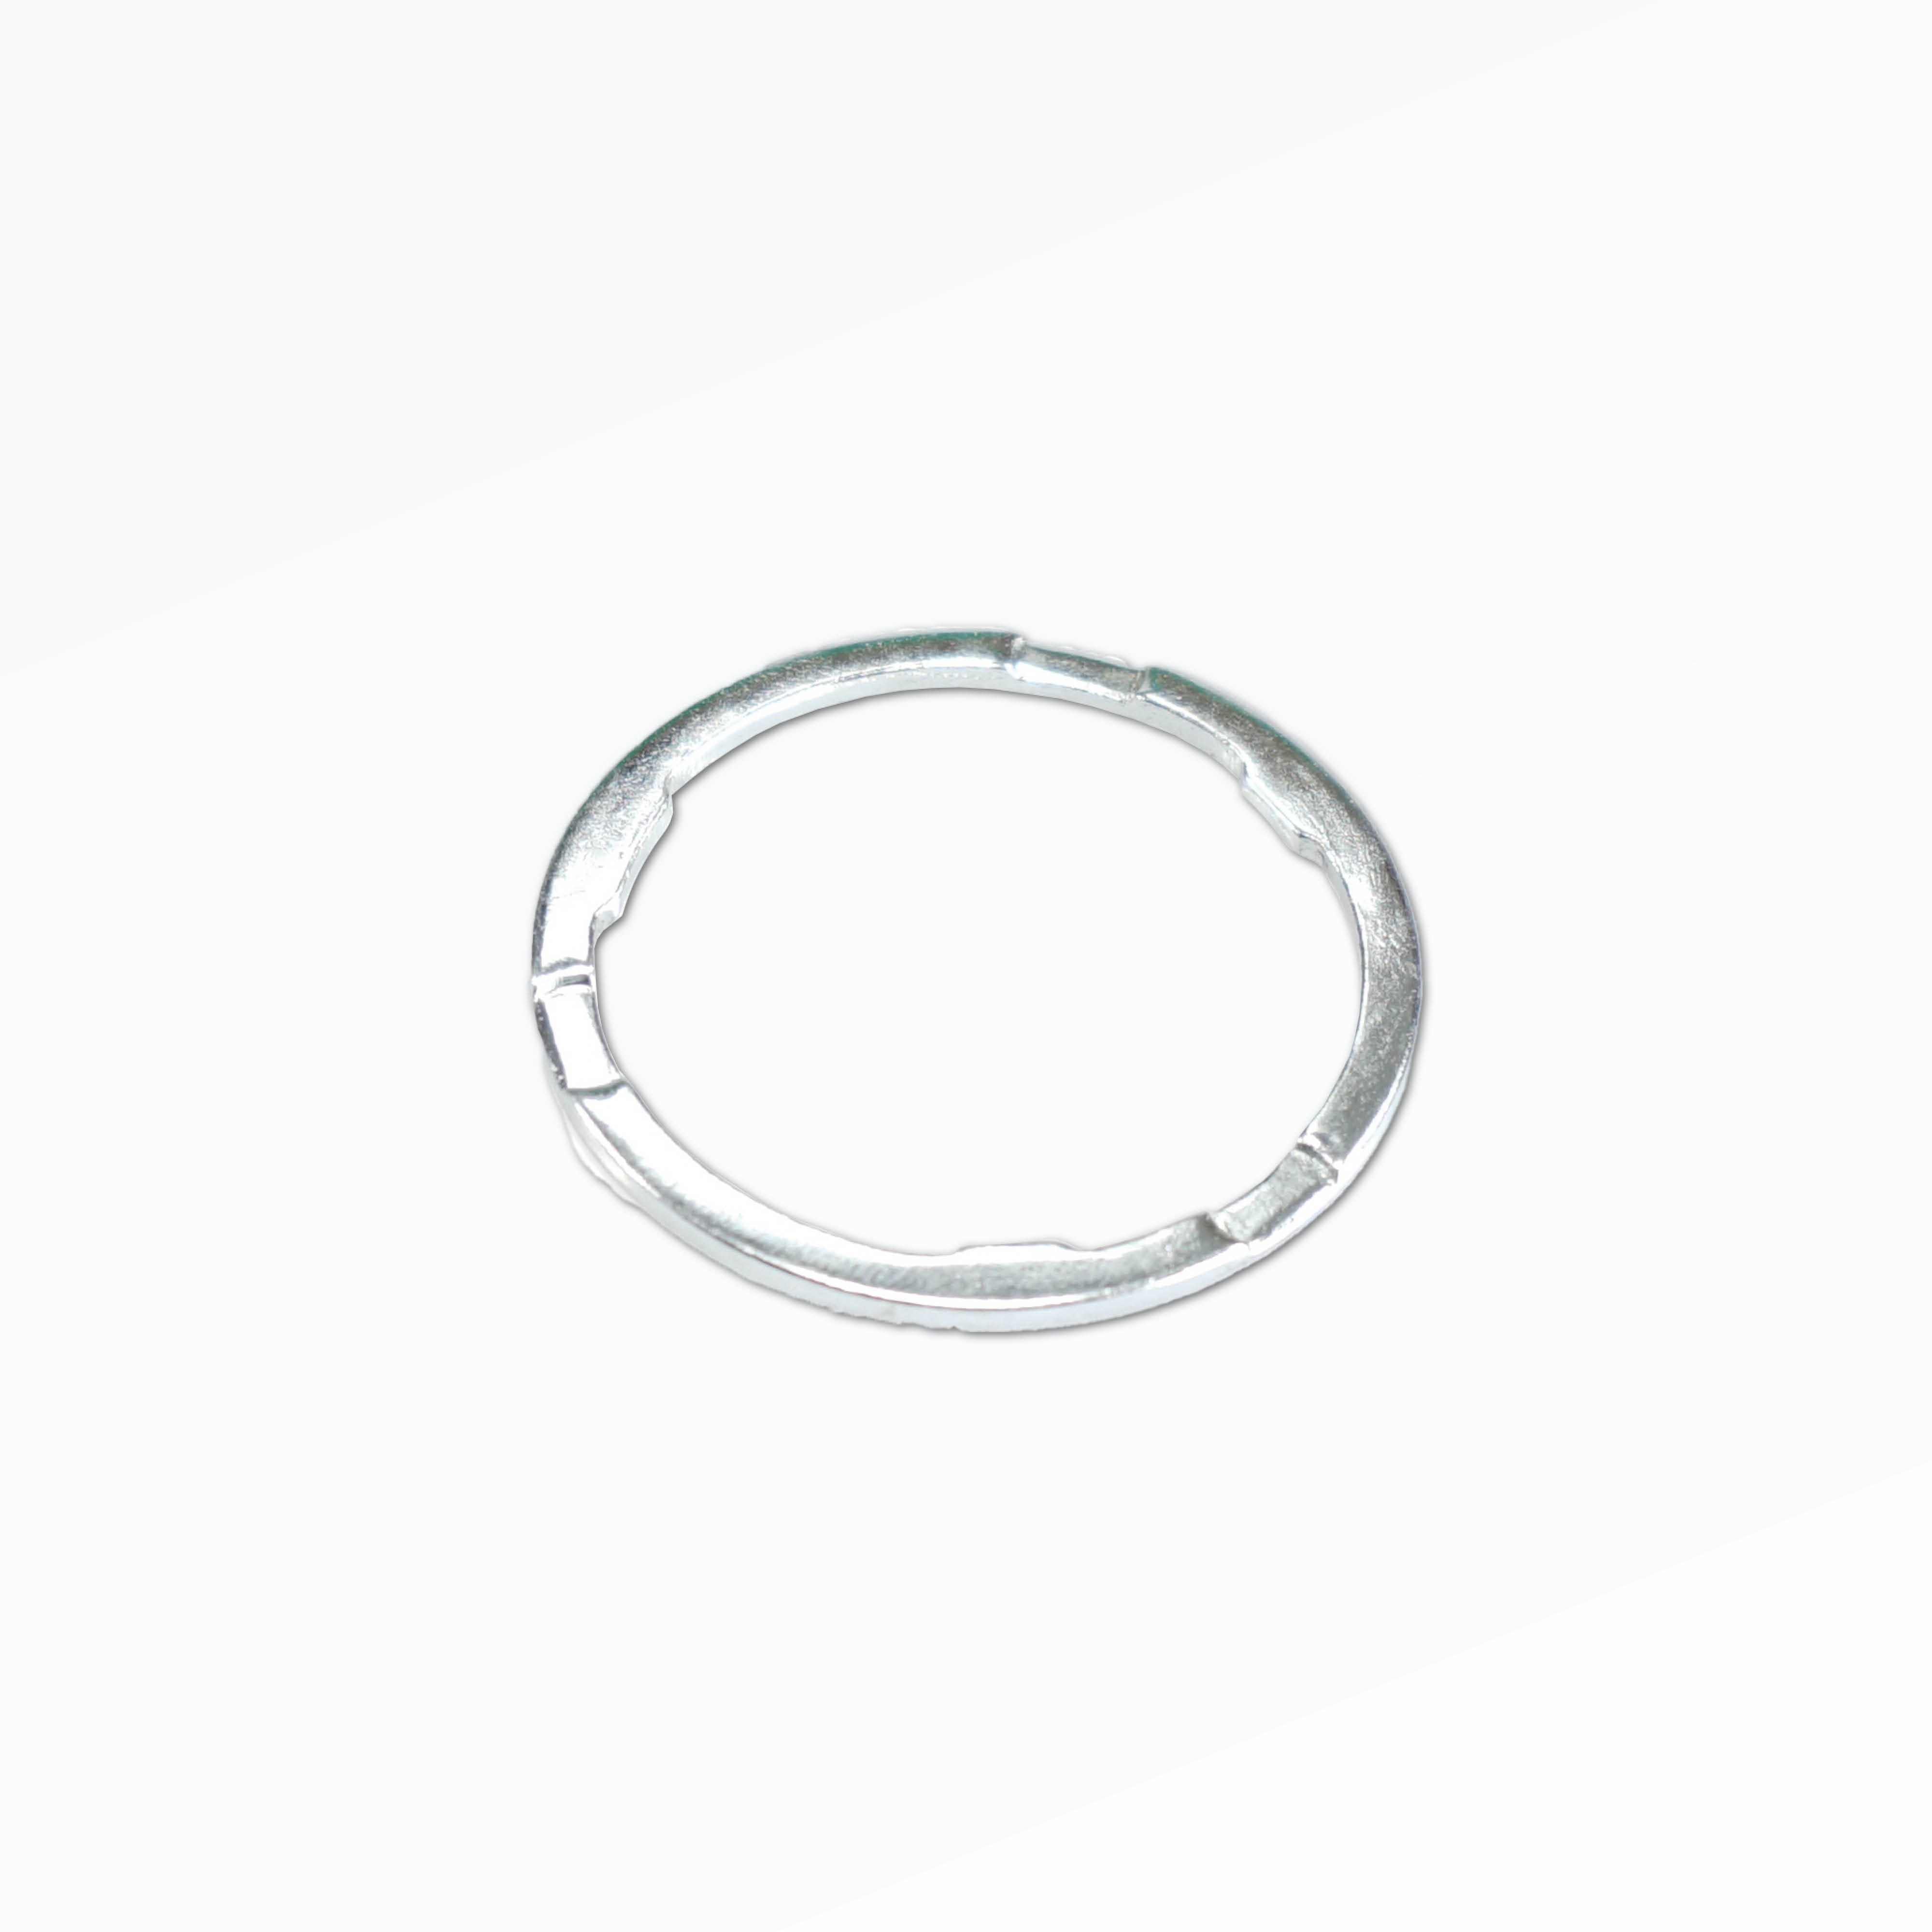 Spacer ring 1.85mm